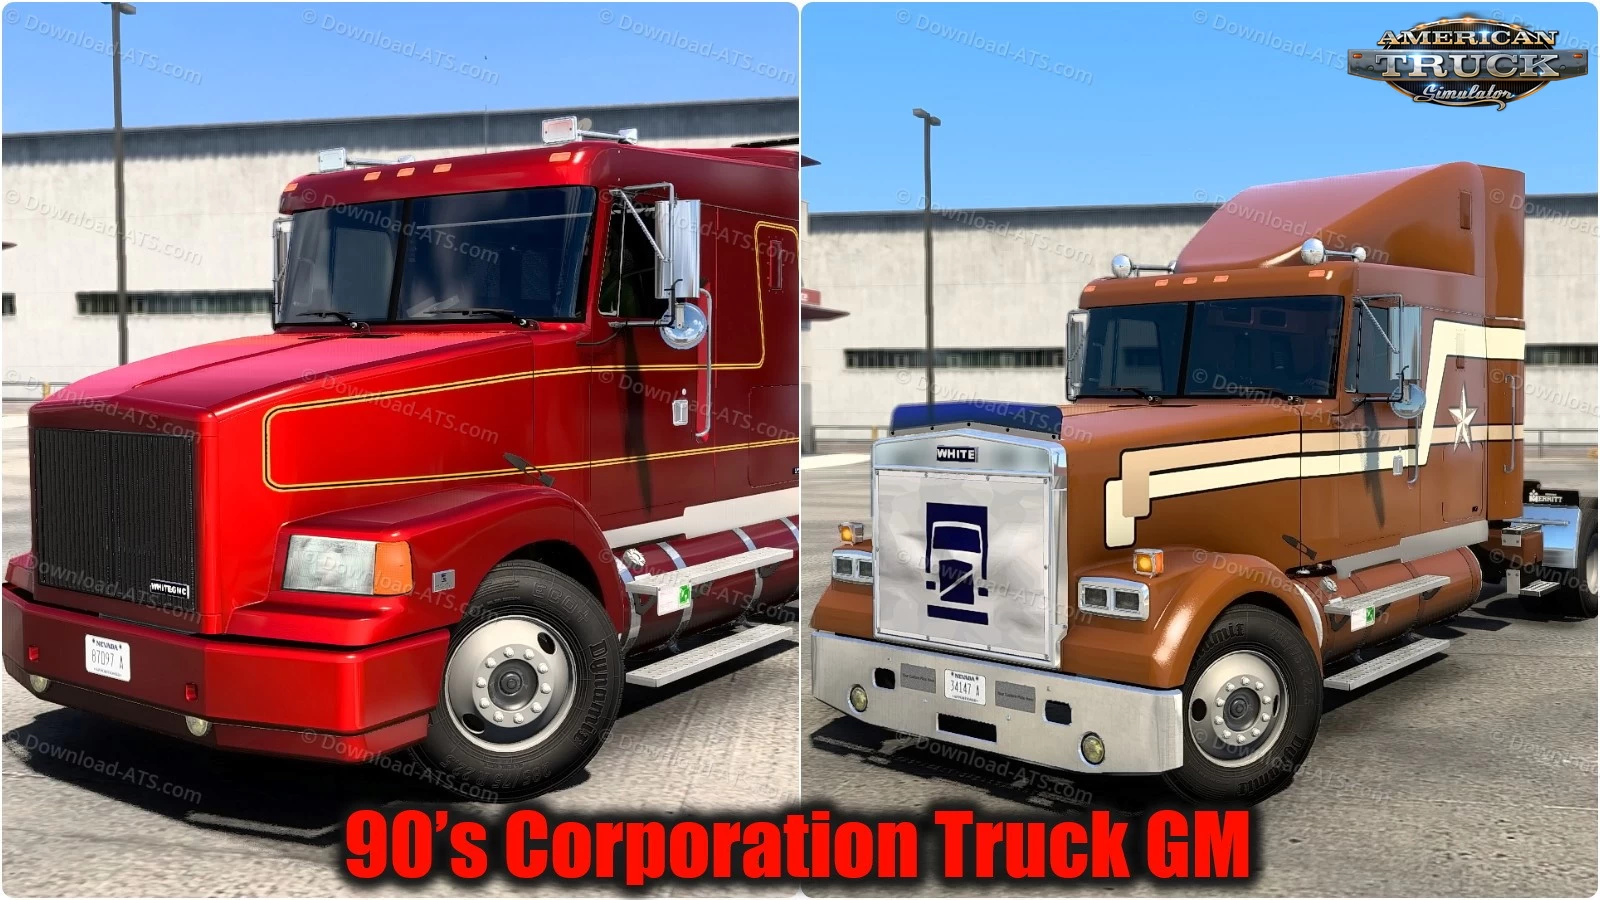 90’s Corporation Truck GM v4.0 (1.49.x) for ATS